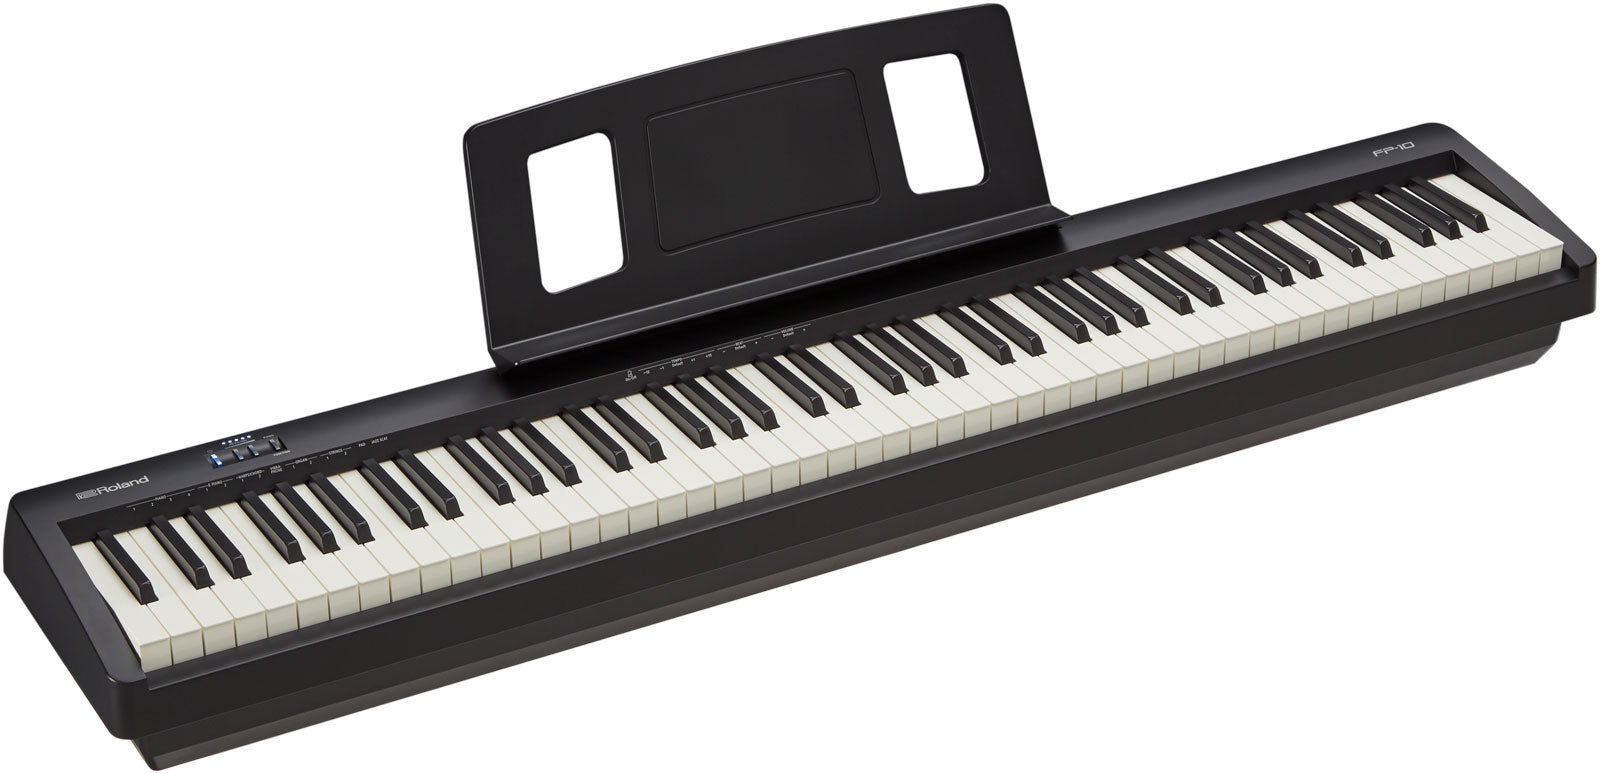 Roland FP-10 88-Key Digital Piano - Portable, Affordable, Weighted Action-Black